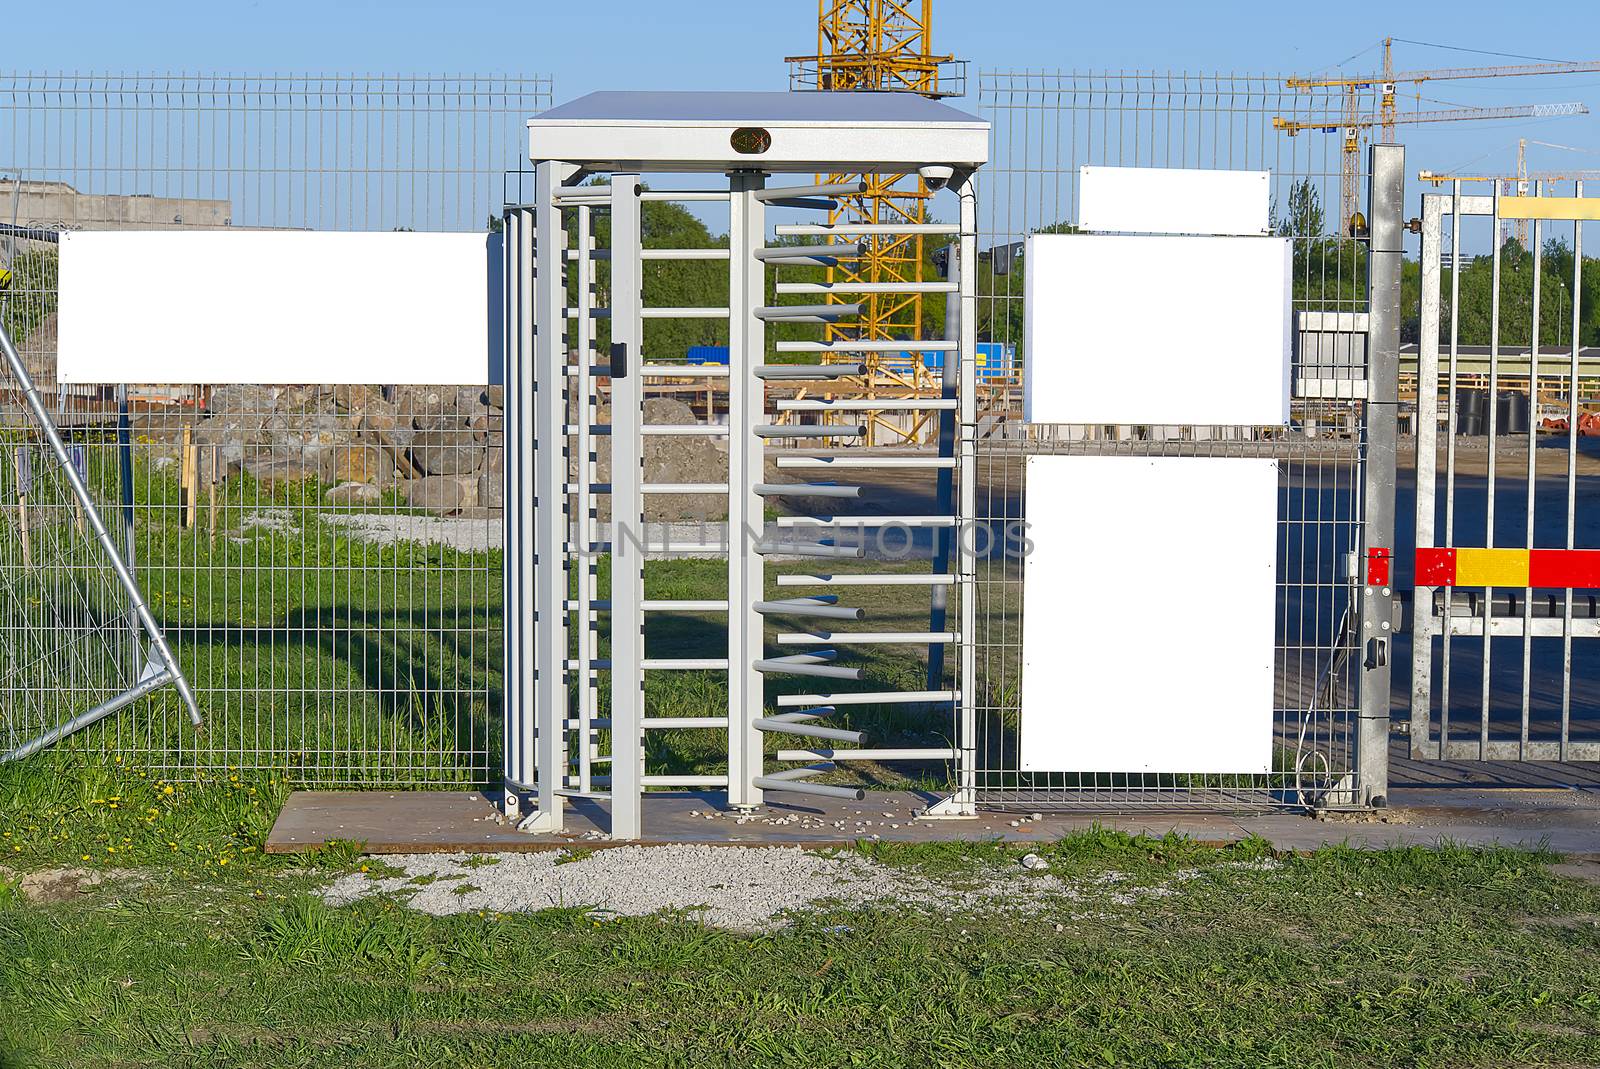 electronic access gates to the construction site. white plates for ad text or security announcements. Blank billboard and outdoor advertising. Mockup poster outside. by PhotoTime